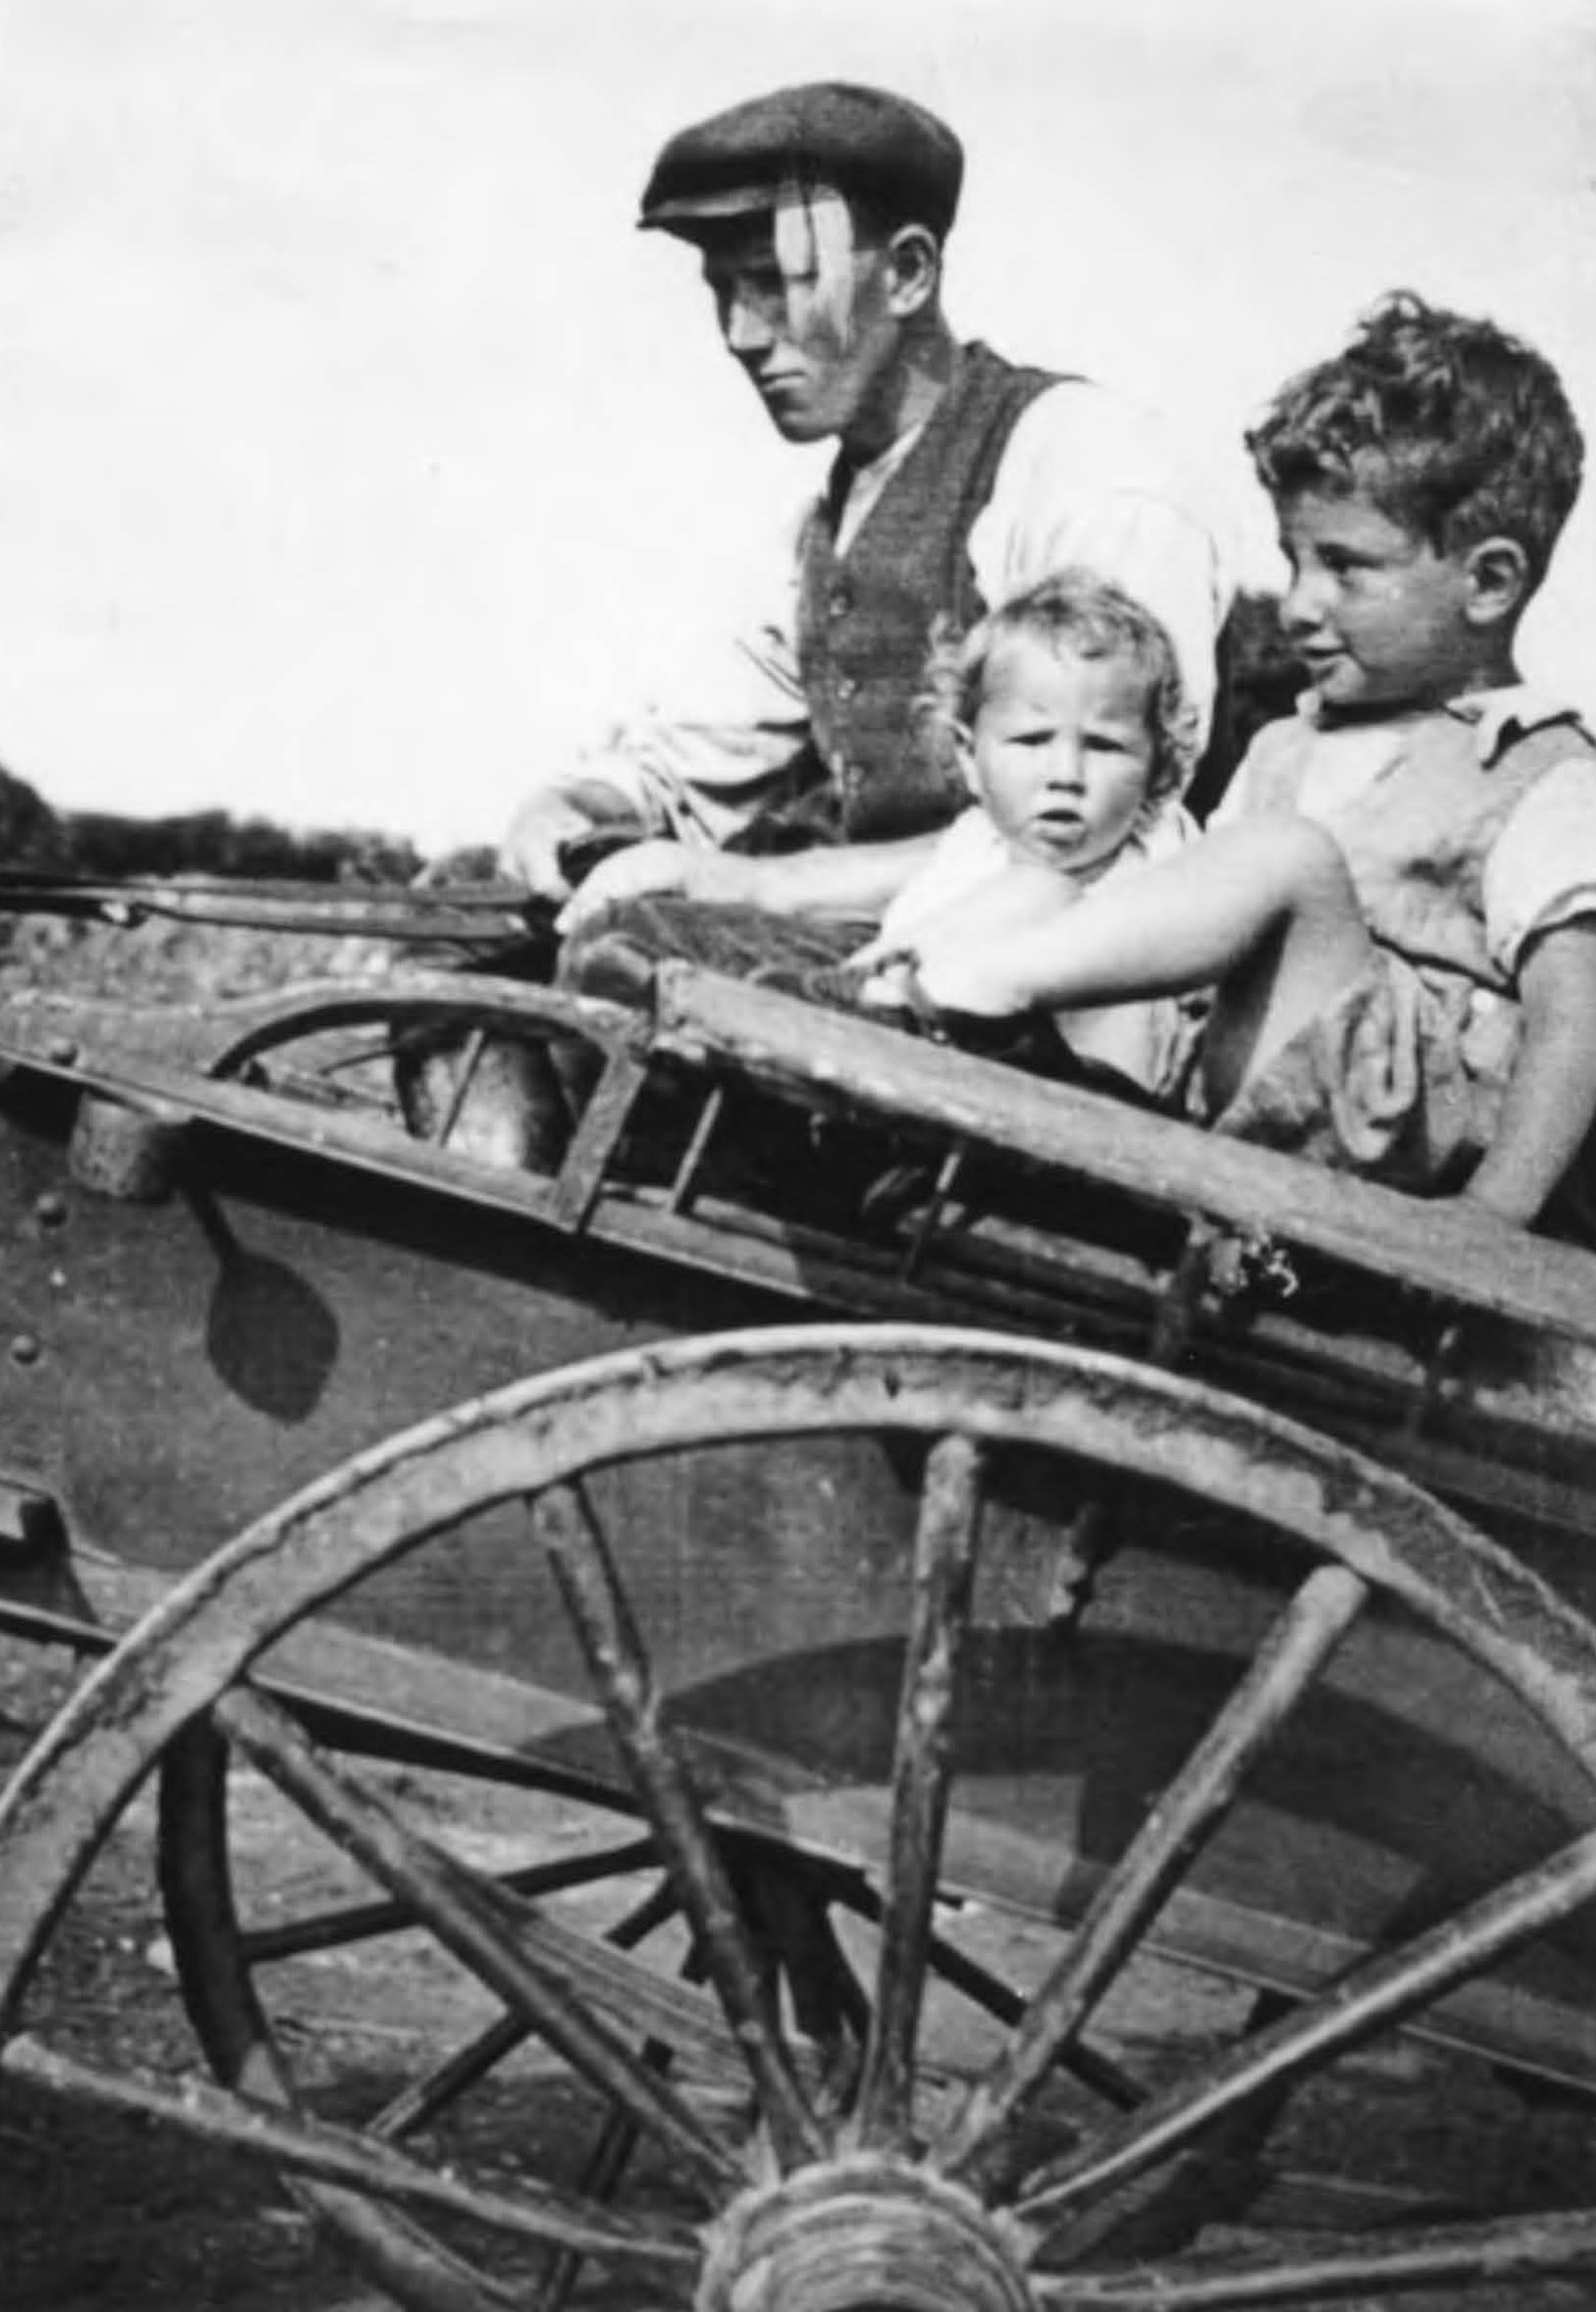 Sam Blake with the Parsons' children in the cart, c 1935